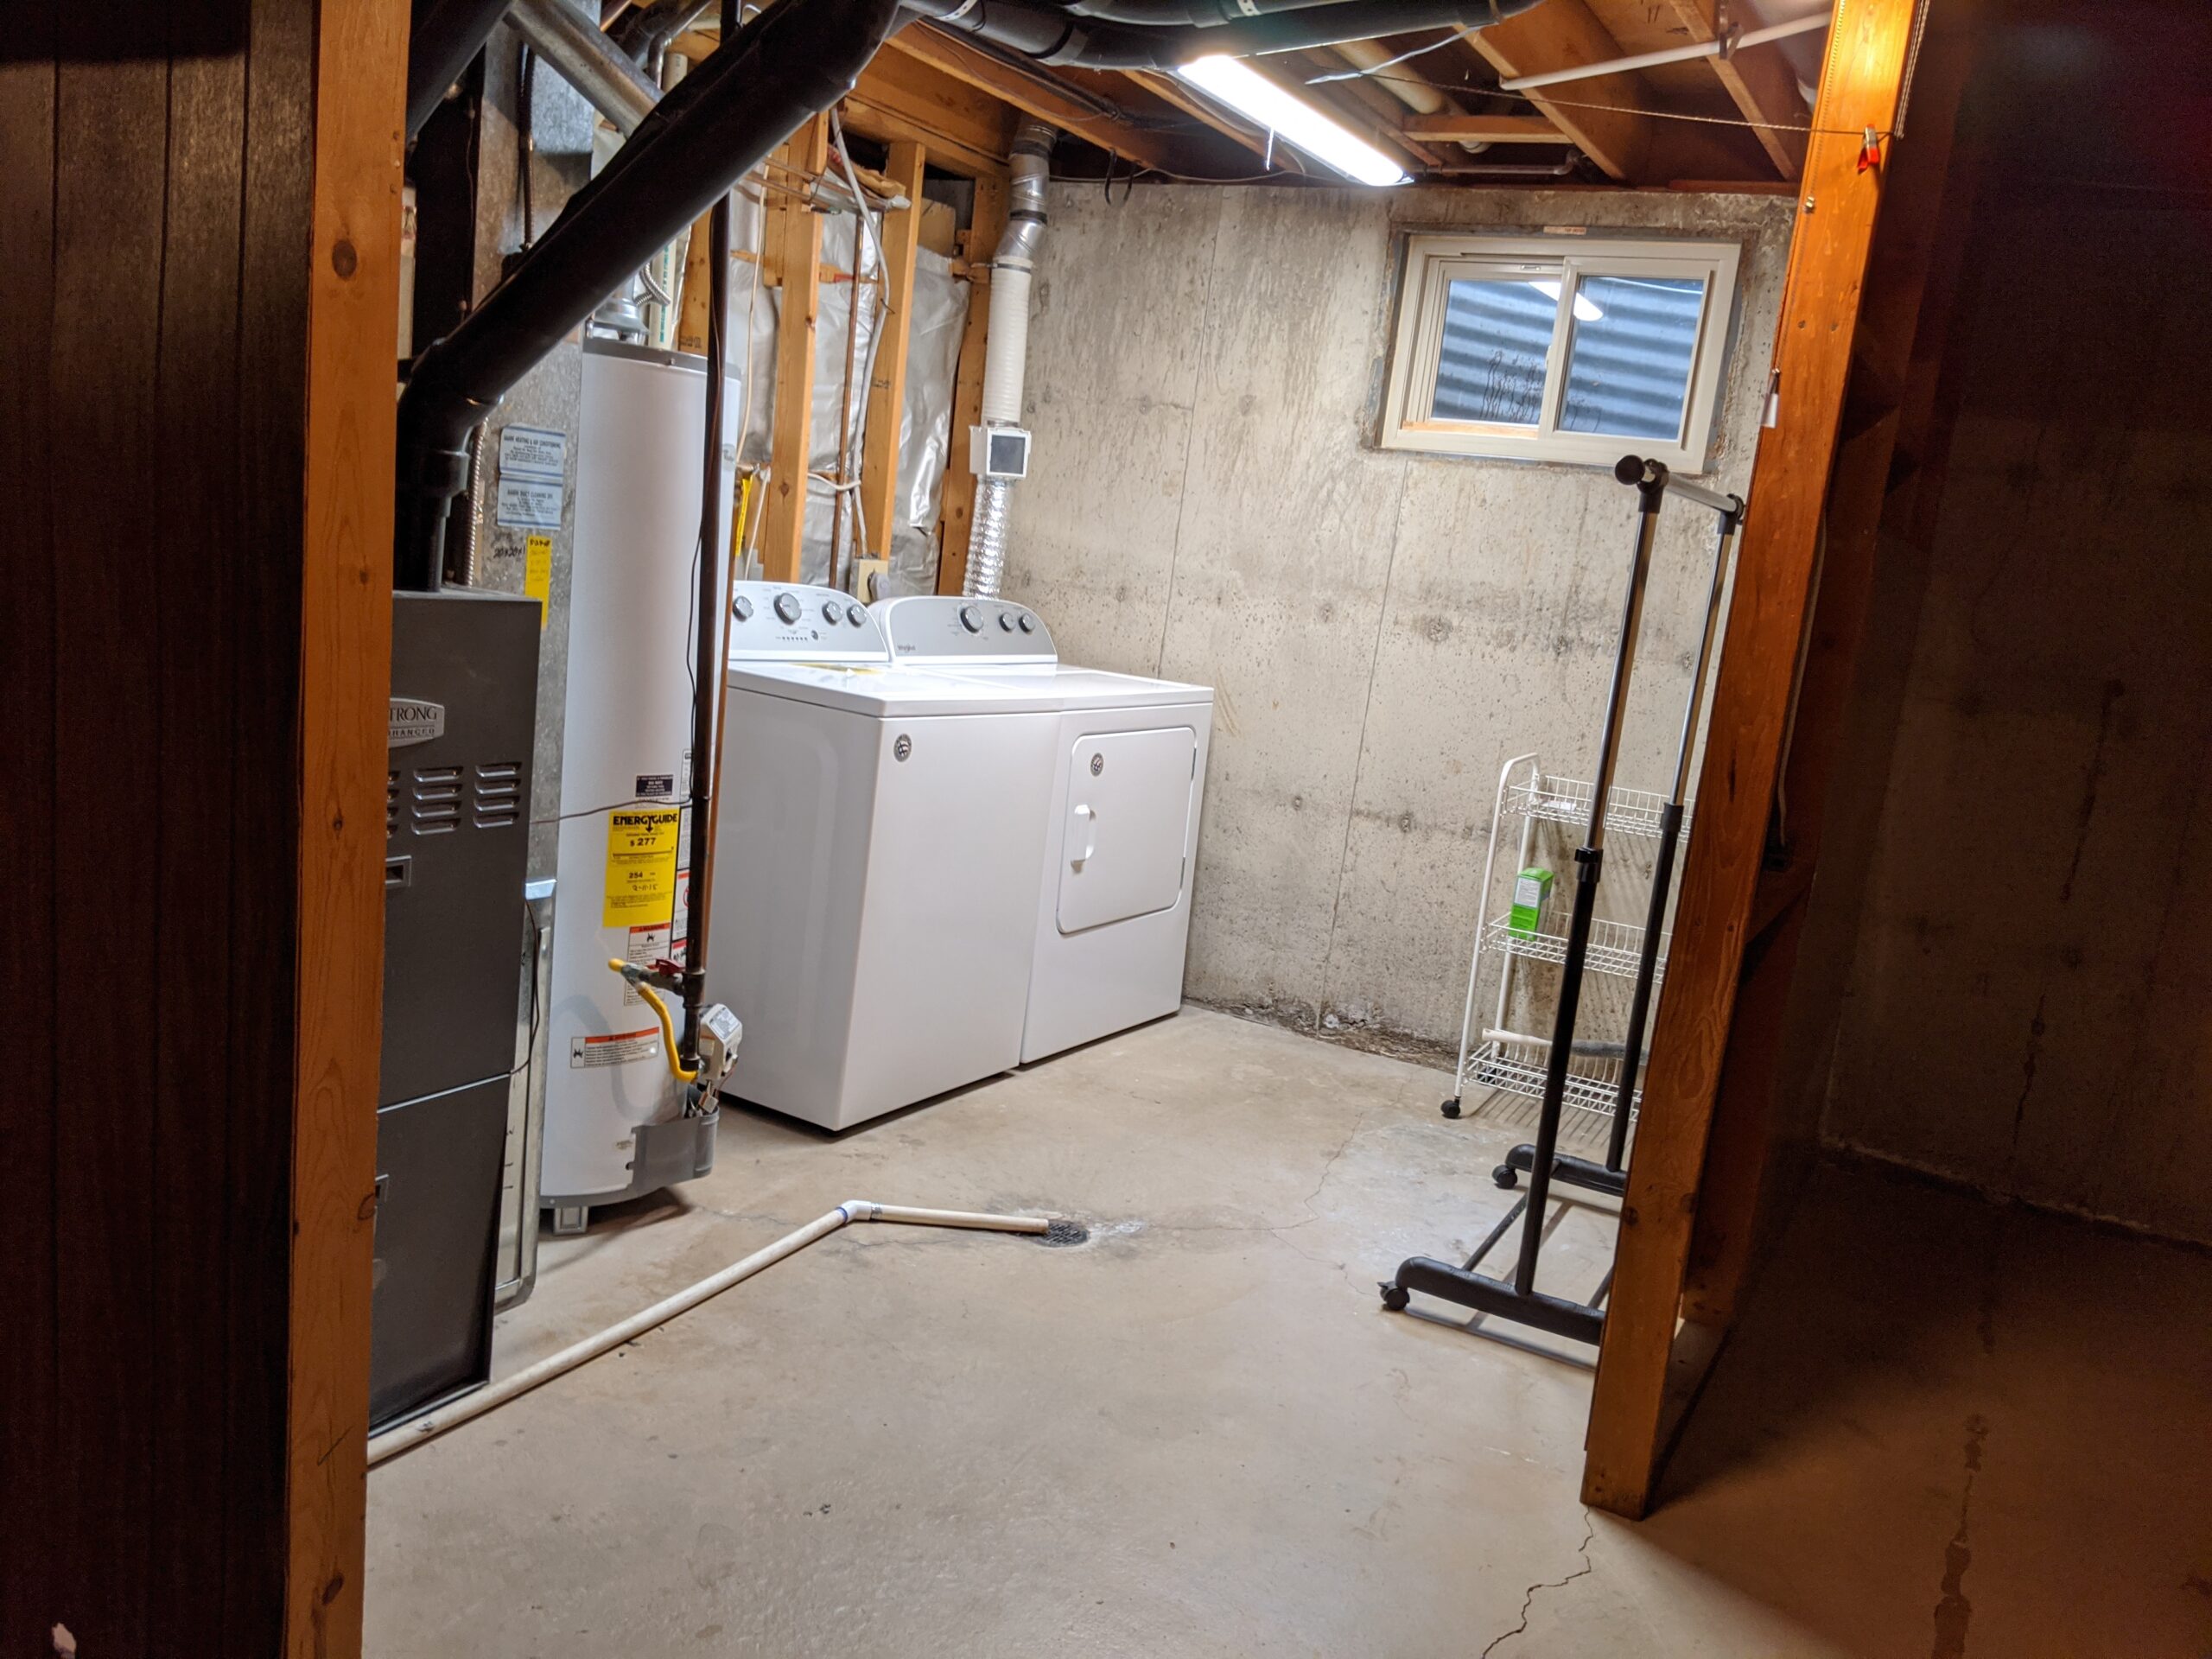 The 1-year-old clothes washing machine and dryer were originally next to the water heater and furnace in an open utility area, on the other side of the bathroom wall. We are making space for them in the bigger basement bathroom floor plan for convenience and cleanliness.